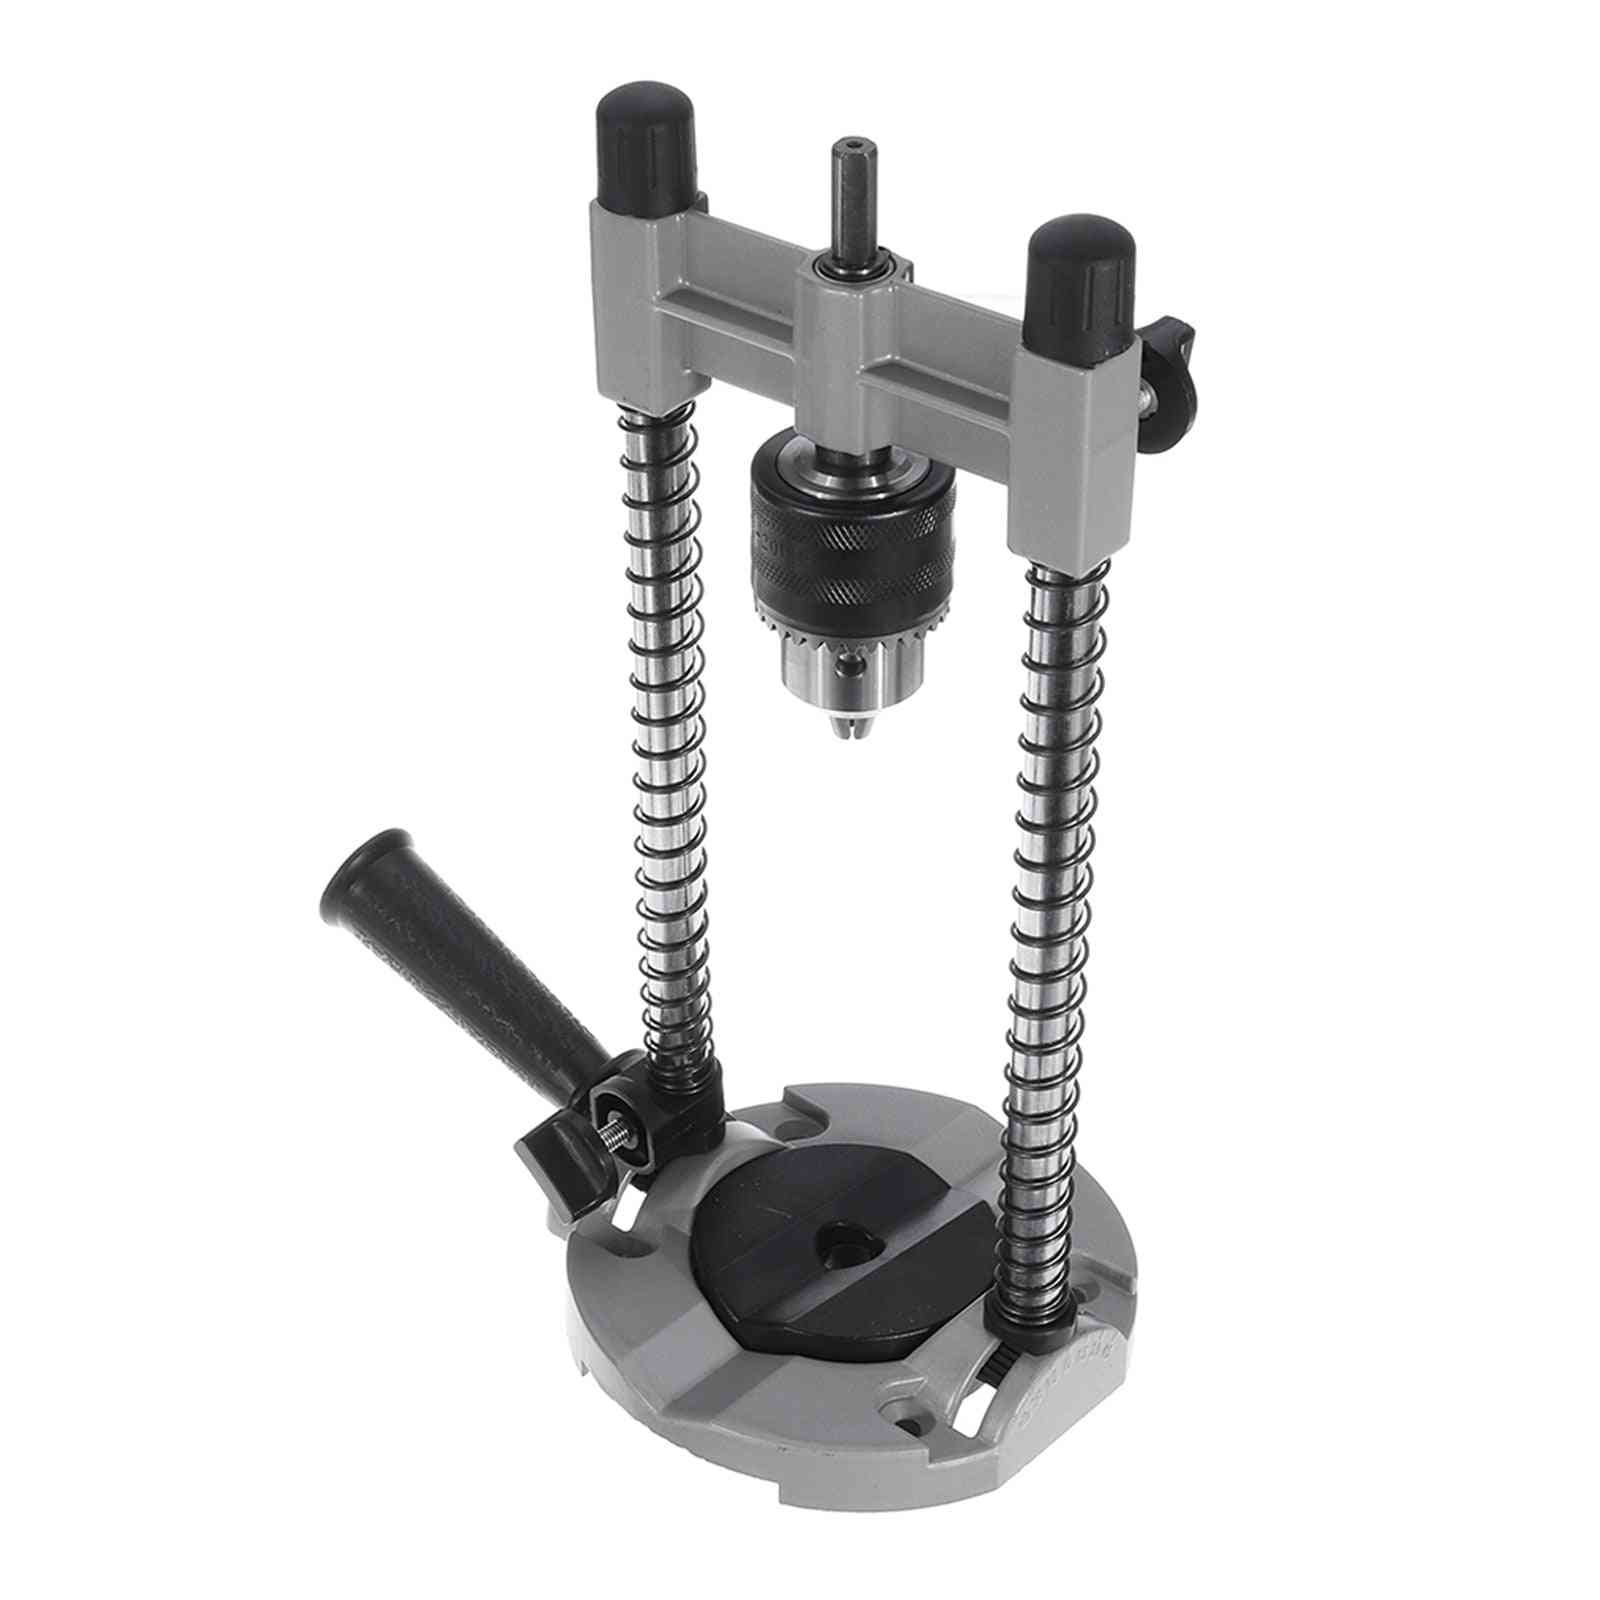 Adjustable Electric Drill Bracket -stand Clamp